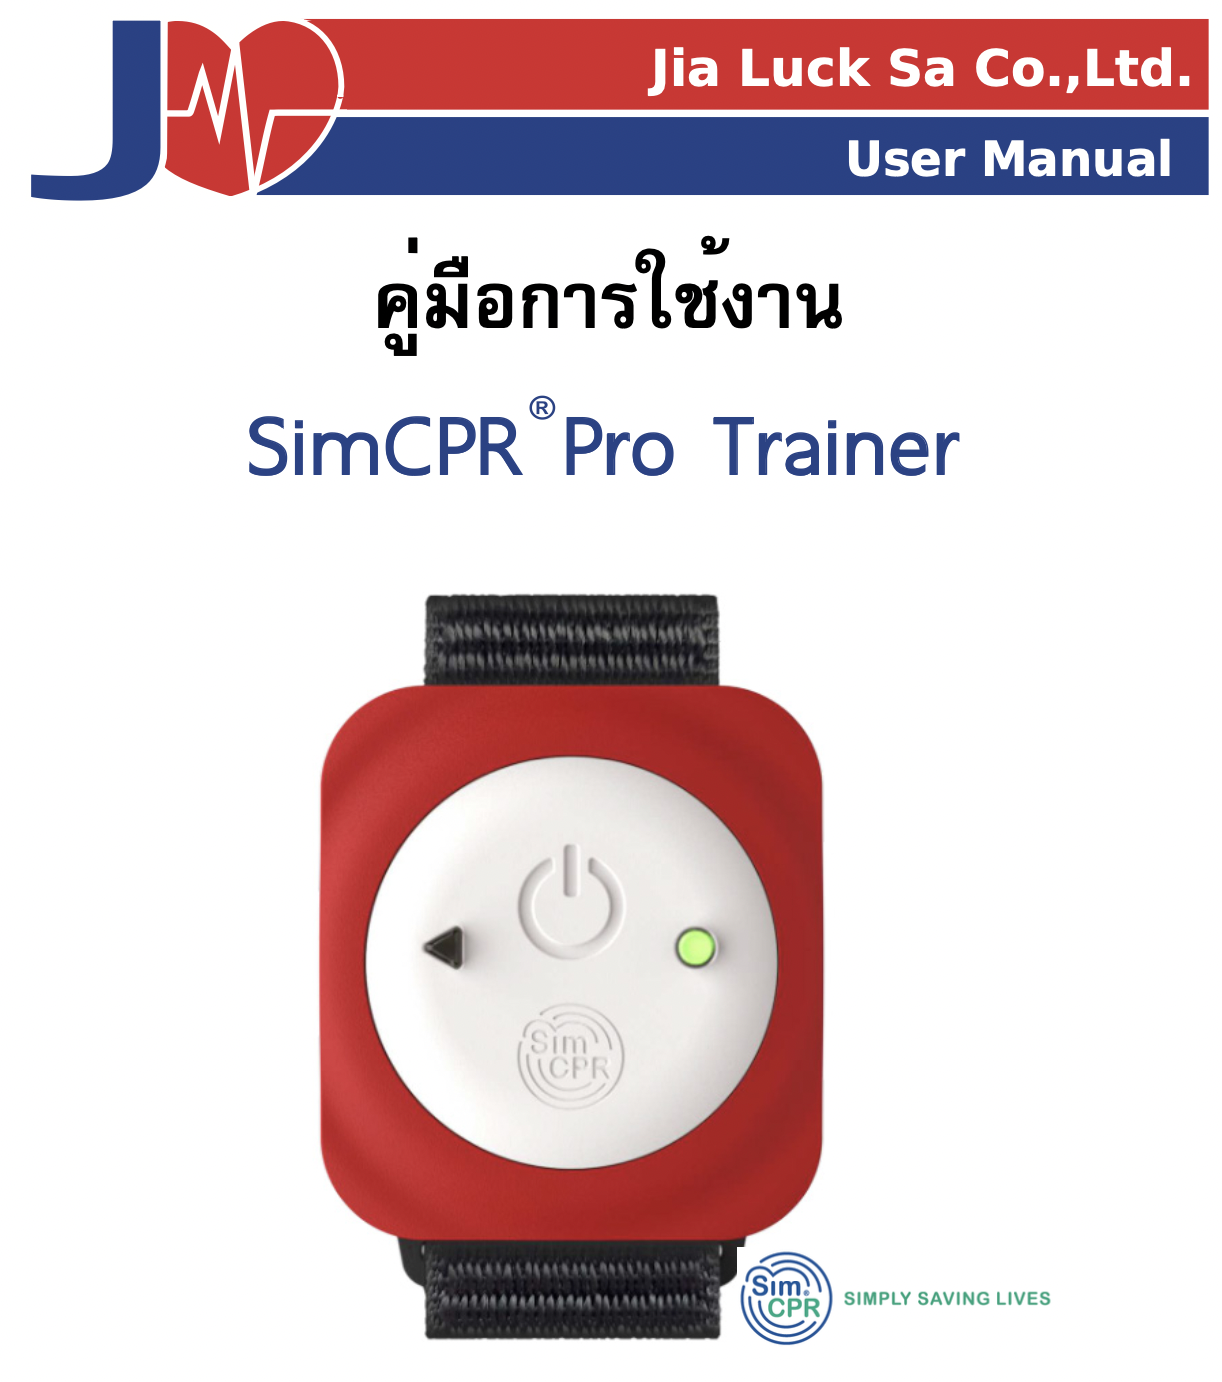 User Manual for SimCPR Trainer(copy)